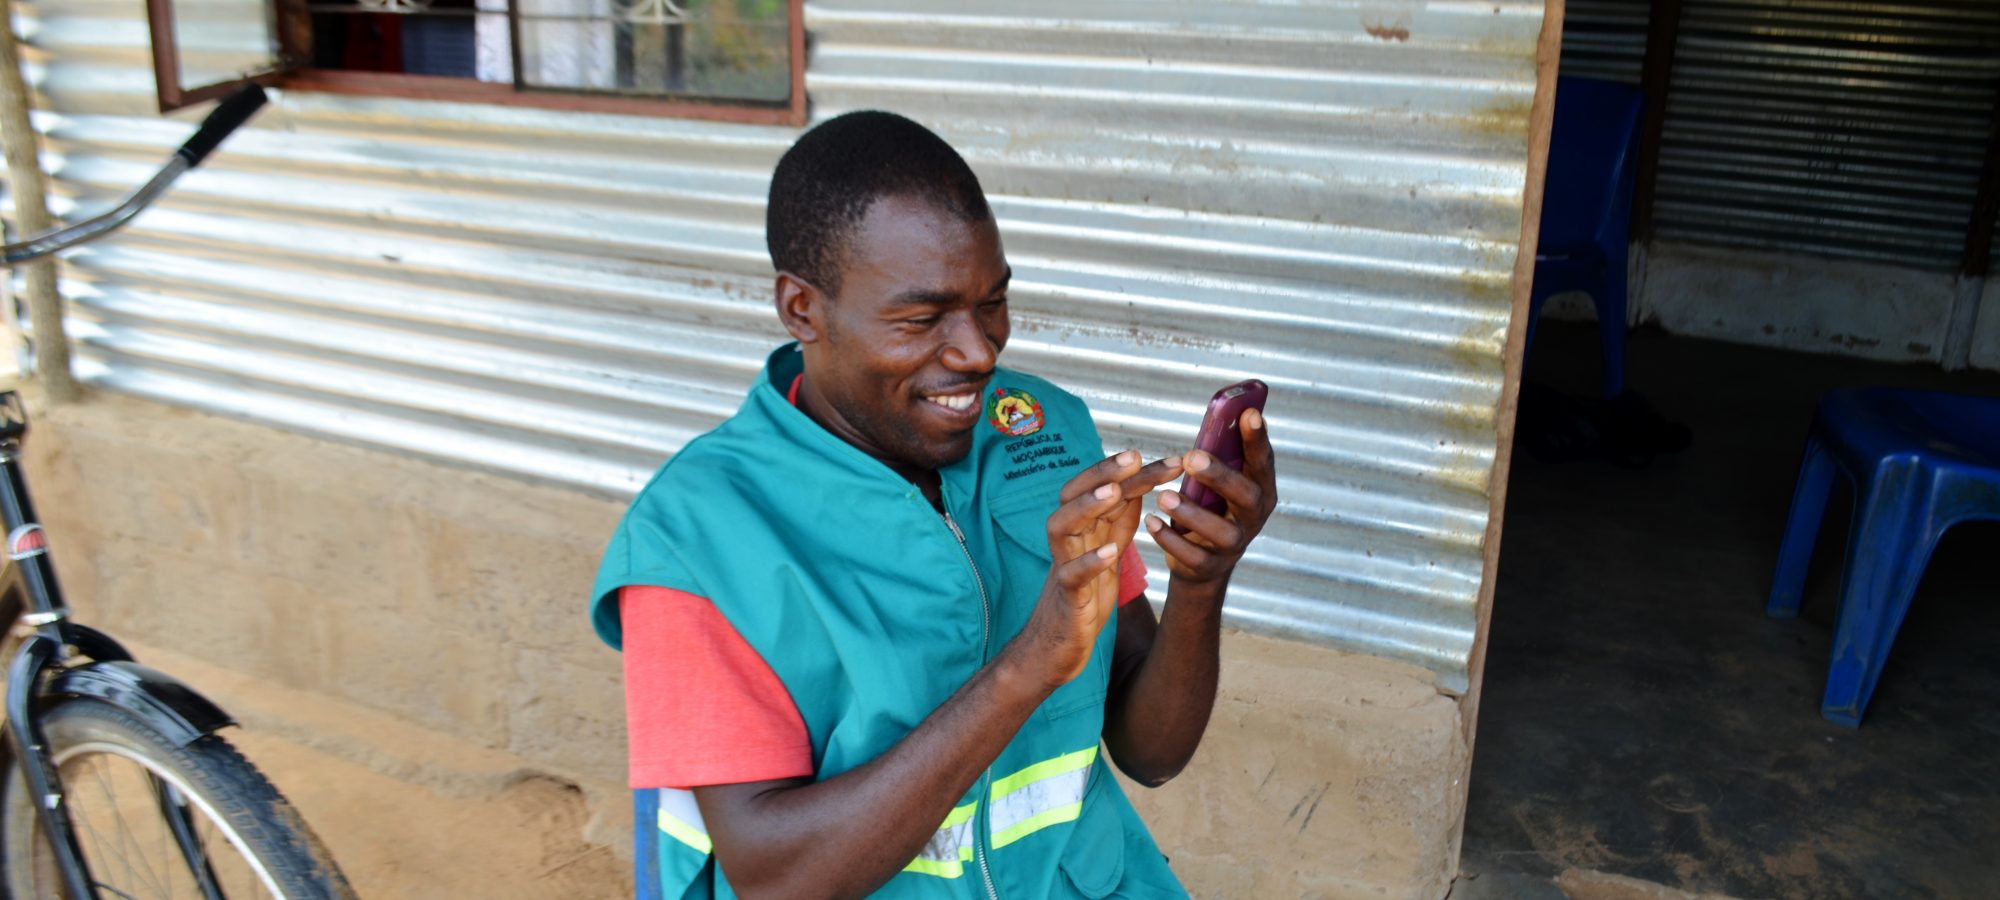 Community health worker using his mobile phone with upSCALE app